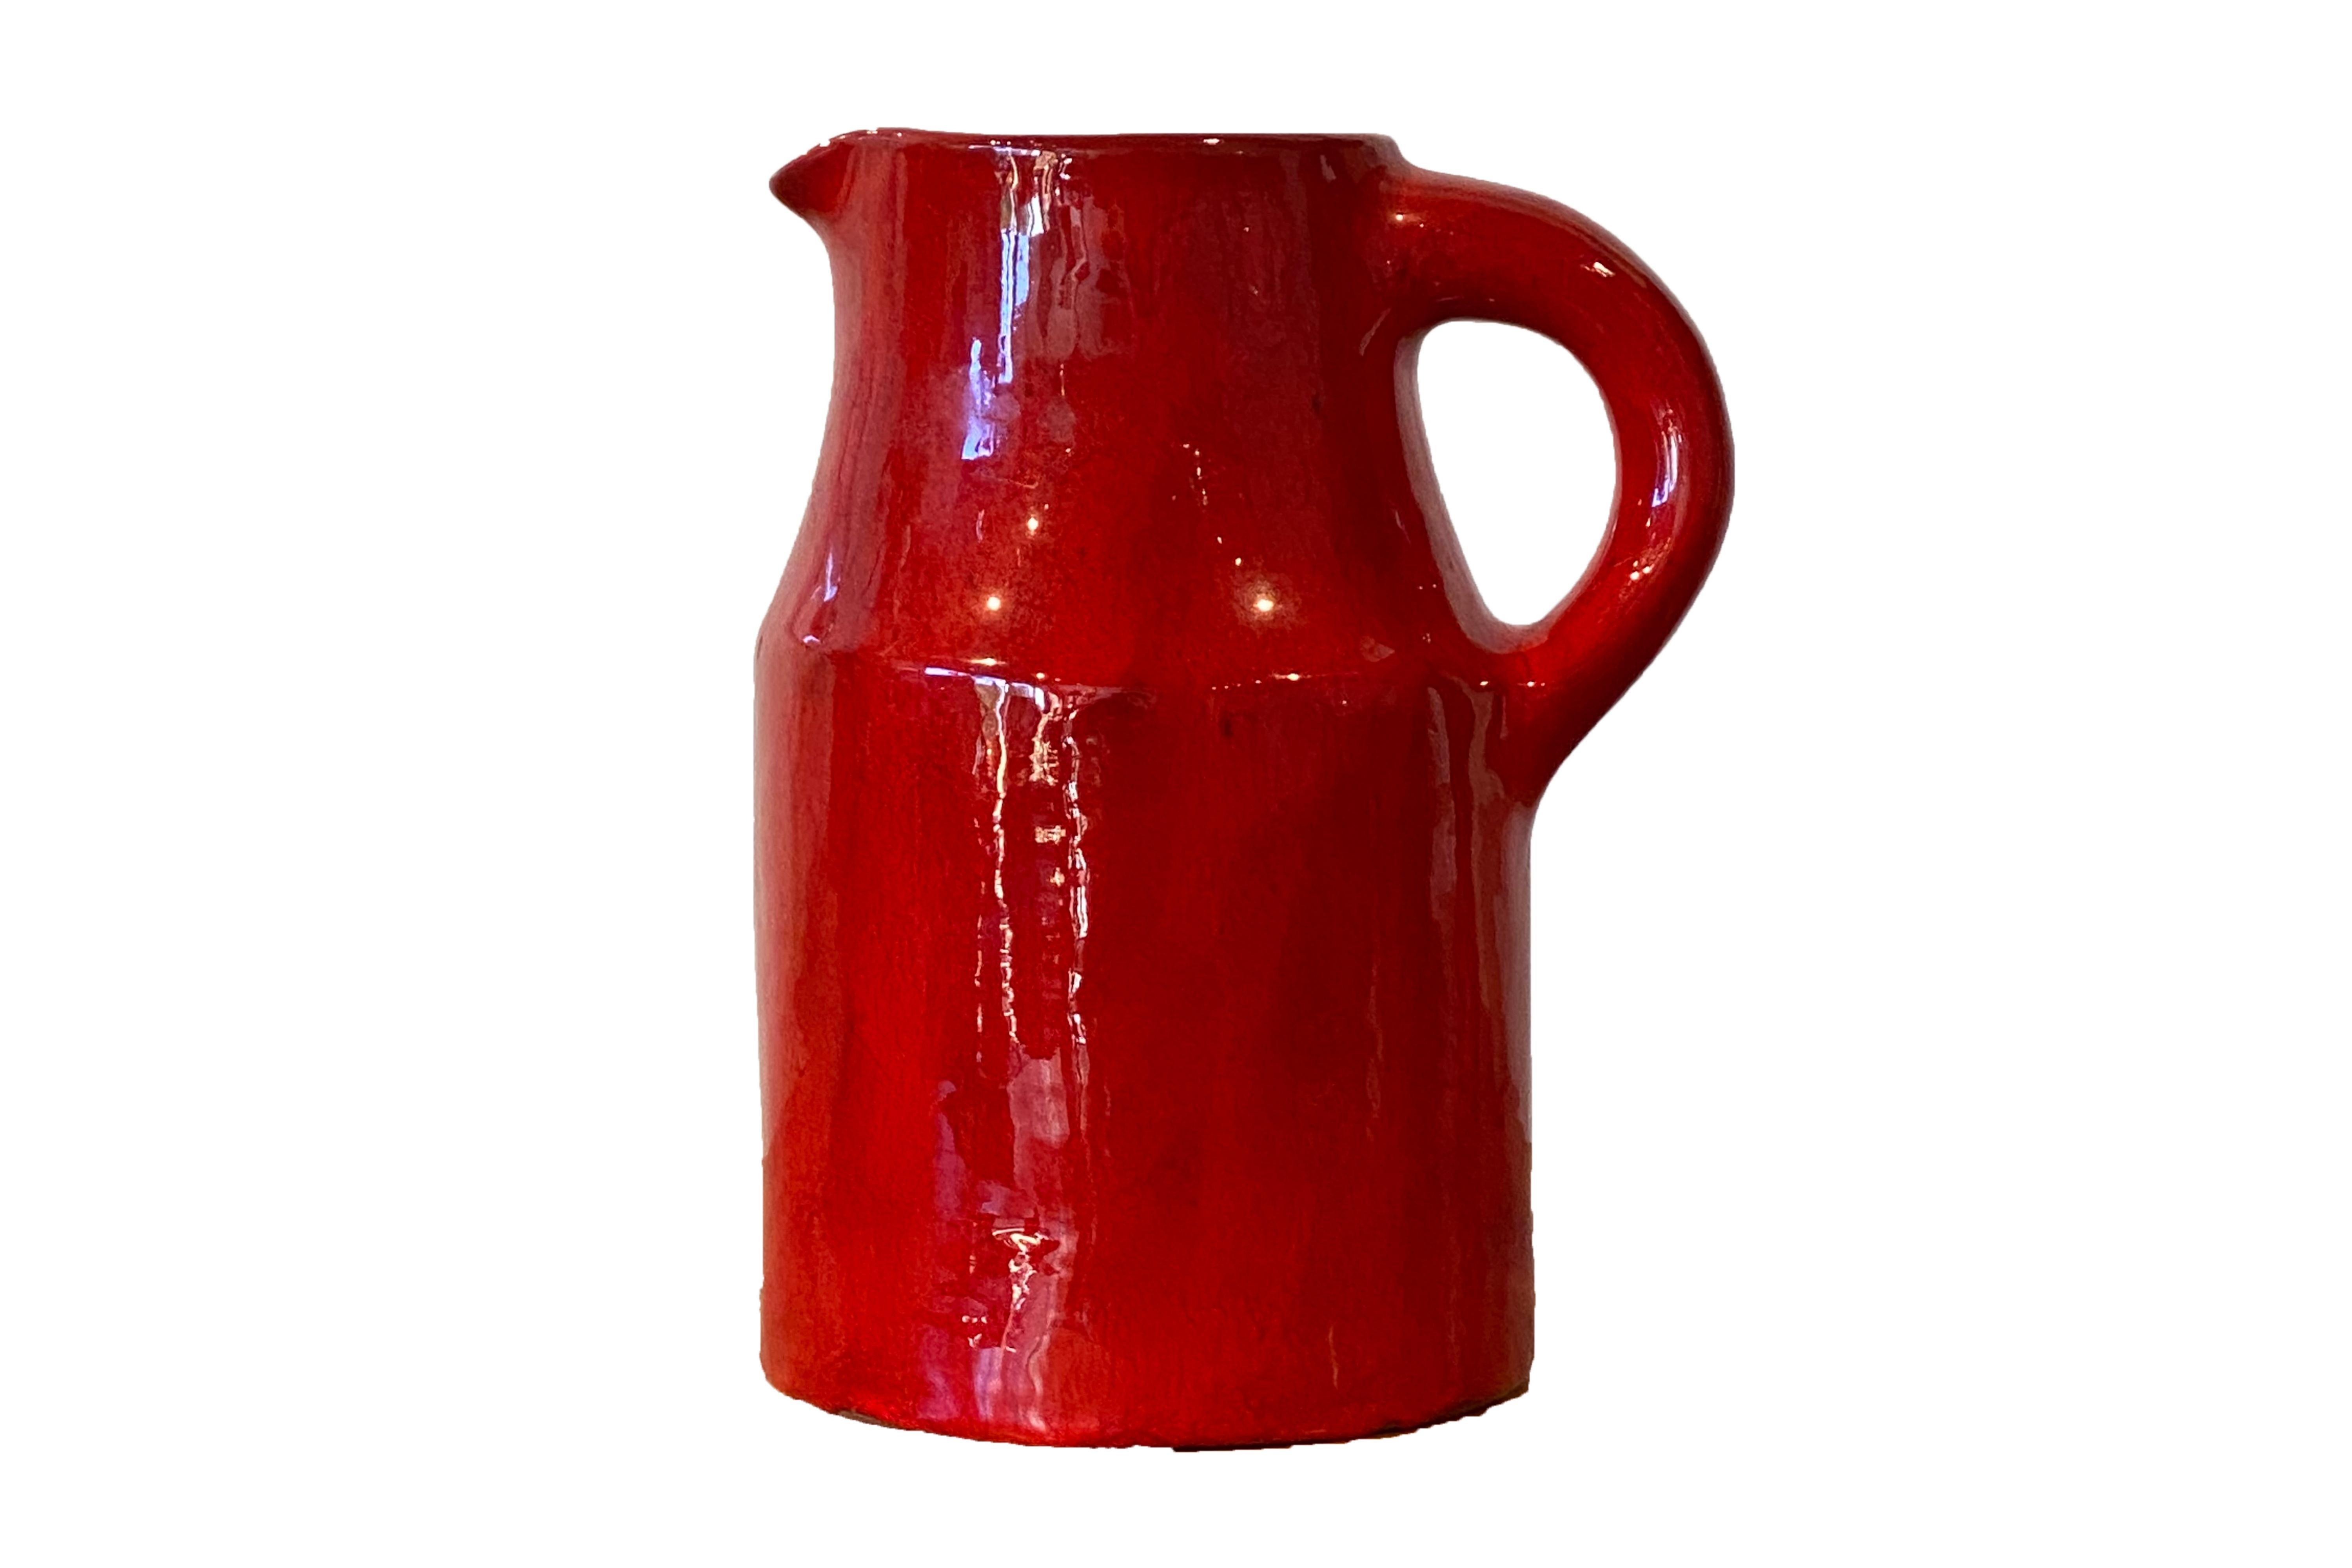 Robert and Jean Cloutier ceramic pitcher.
Emblematic red glazed ceramic.
Signed,
circa 1960, France.
Very good vintage condition.
Robert and Jean Cloutier were twin brothers, collaborating as artists and ceramicists, and signing their works